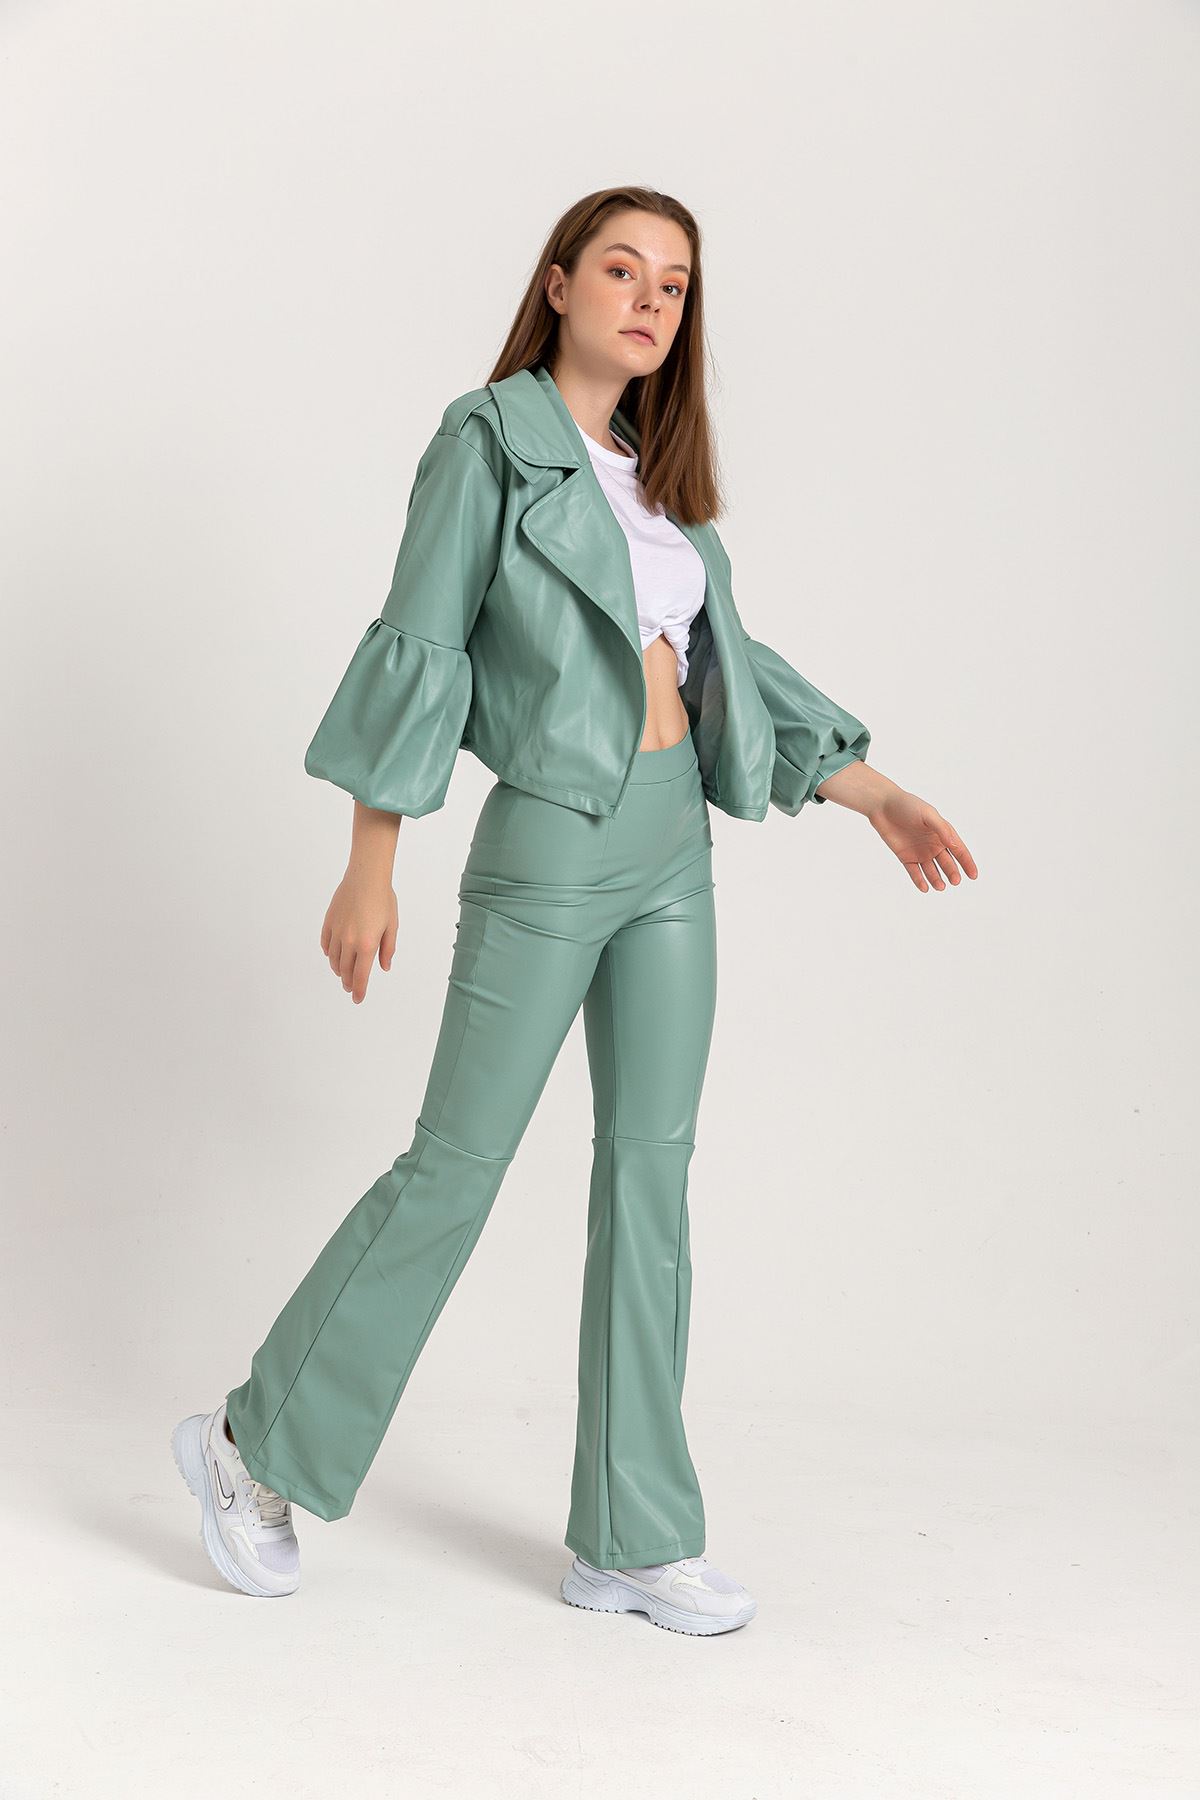 Leather Fabric Long Tigth Fit Flare Women'S Trouser - Mint